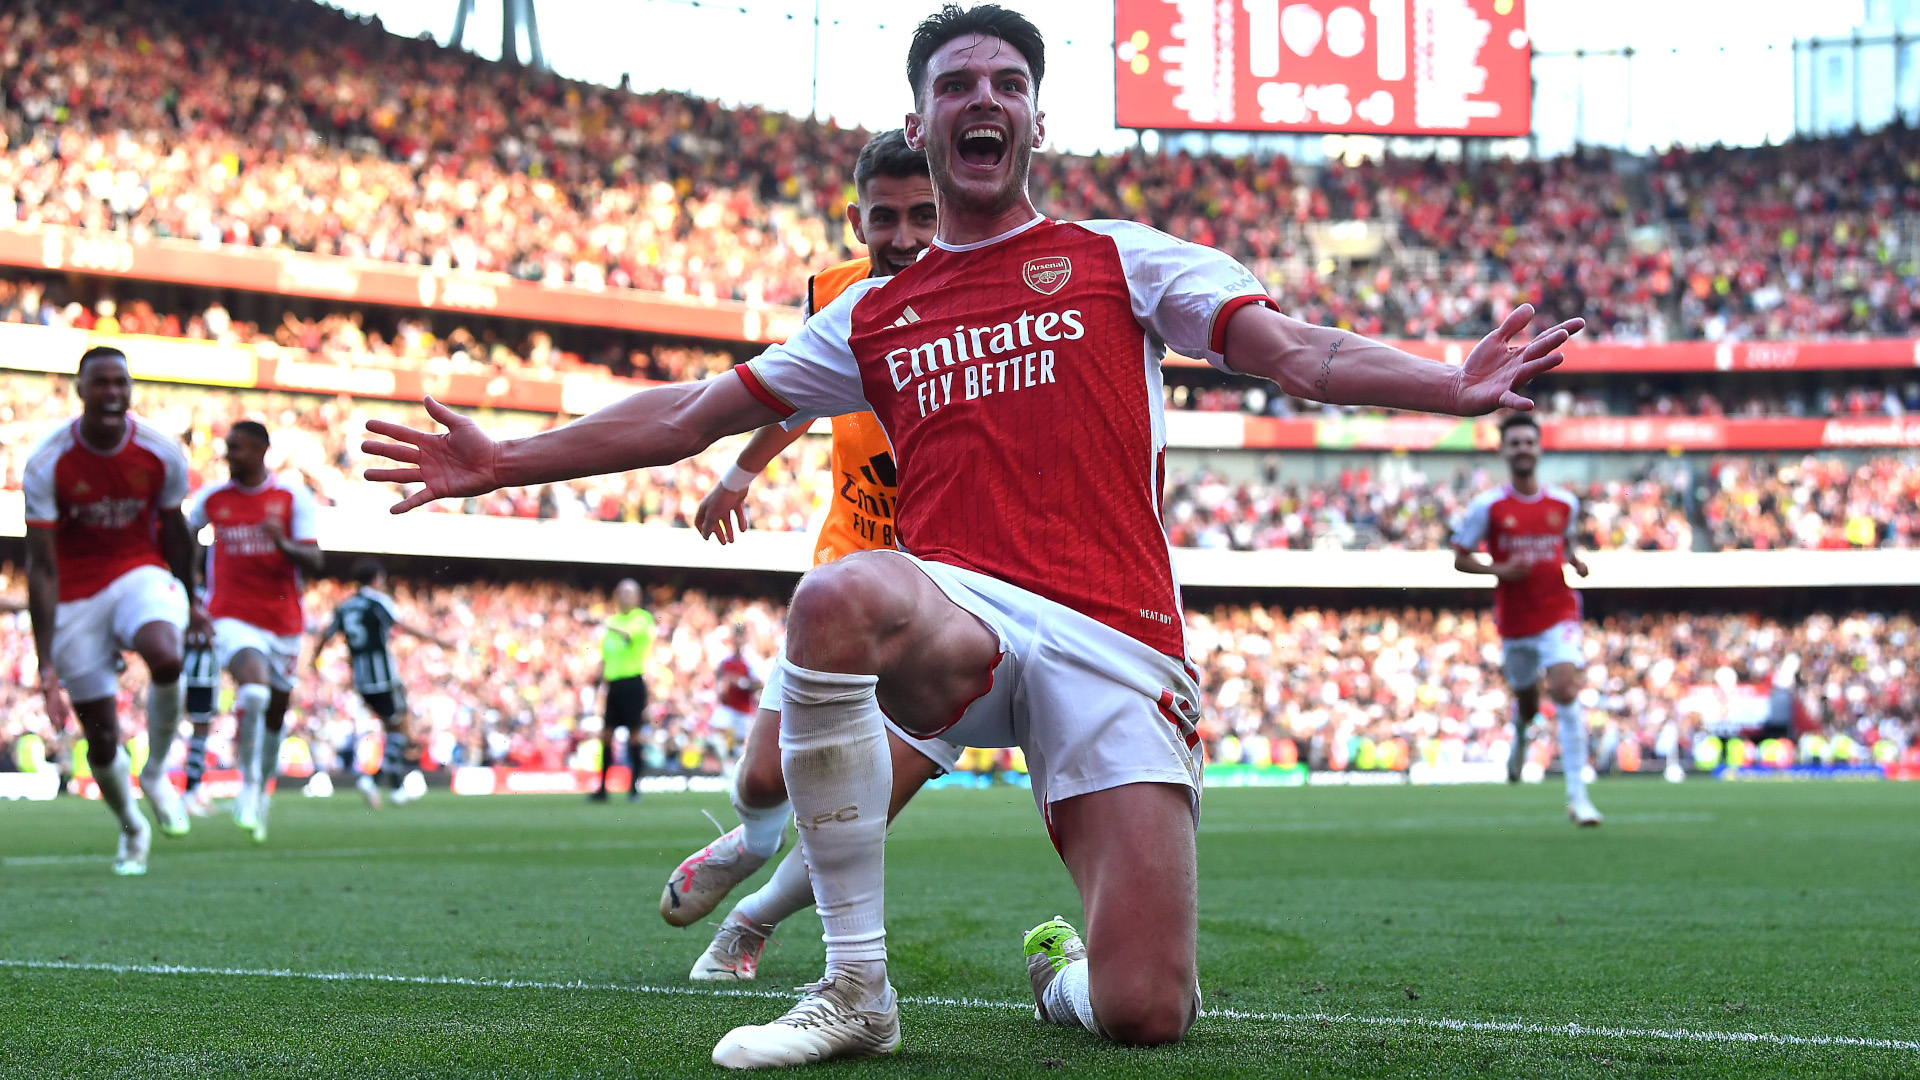 Arsenal vs Fulham live streaming: Arsenal vs Fulham: Where to watch on TV,  live streaming, know team news, head-to-head, kick-off time - The Economic  Times